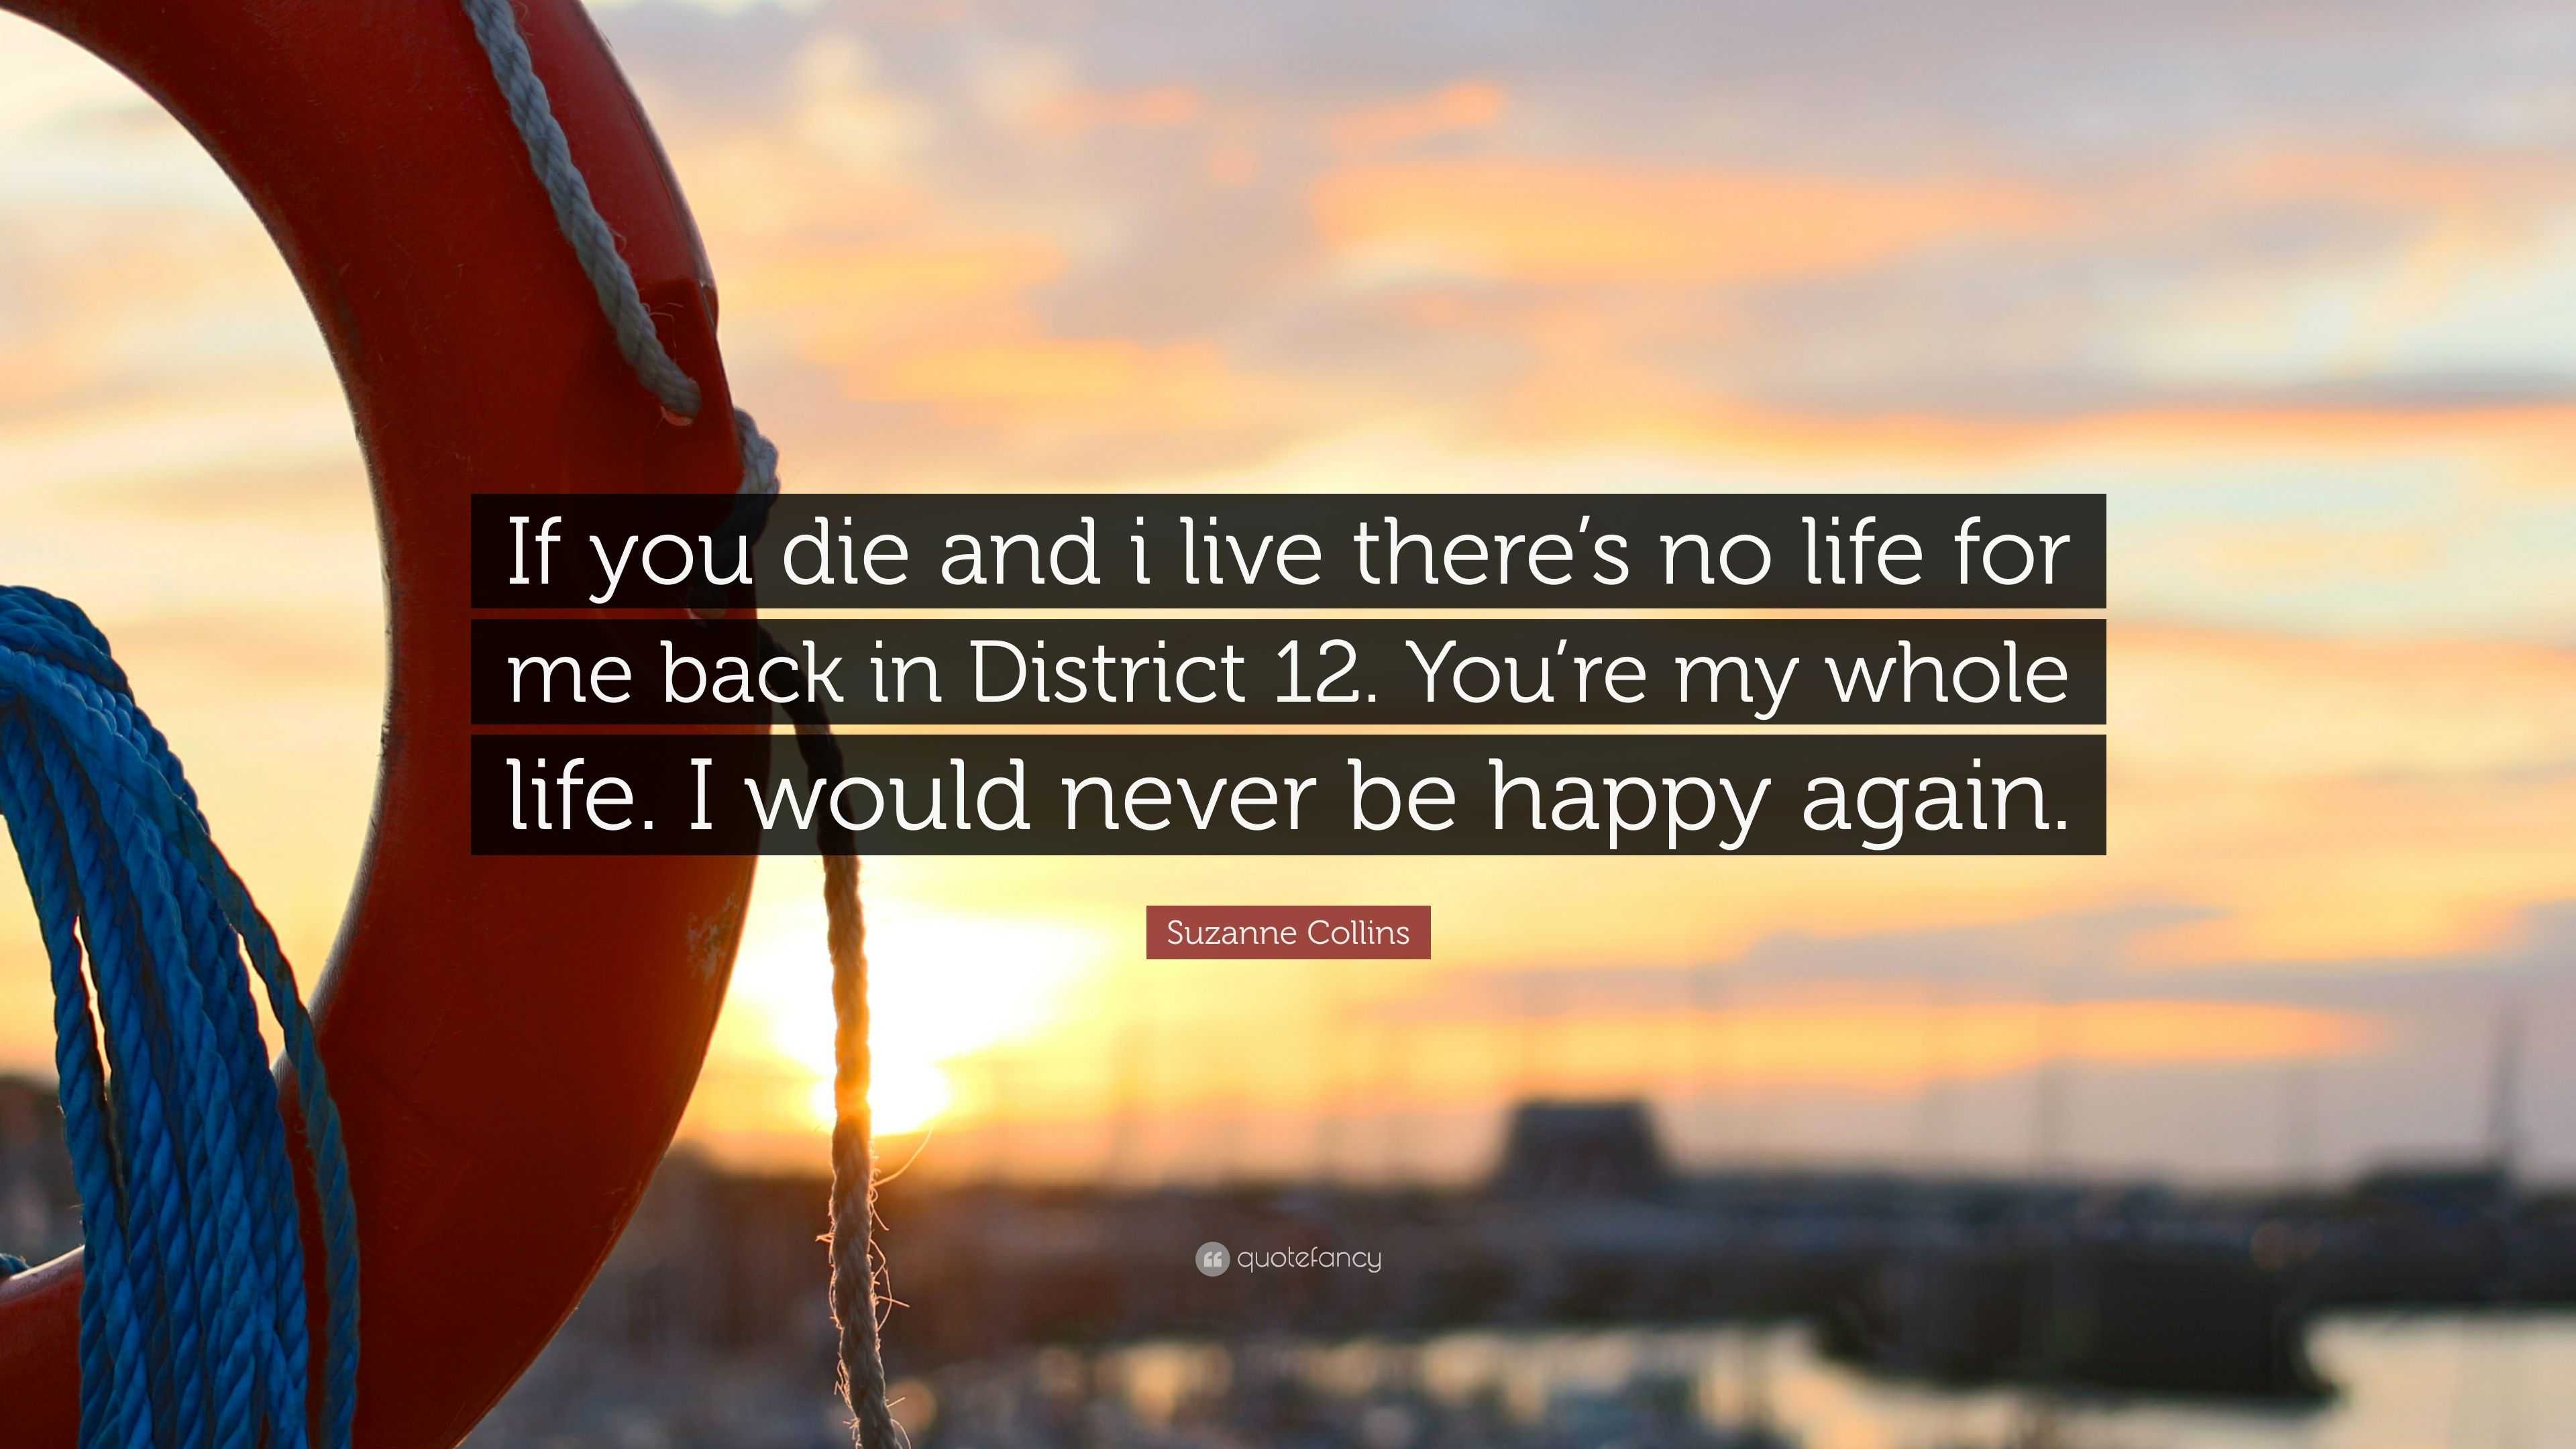 Suzanne Collins Quote “If you and i live there s no life for me